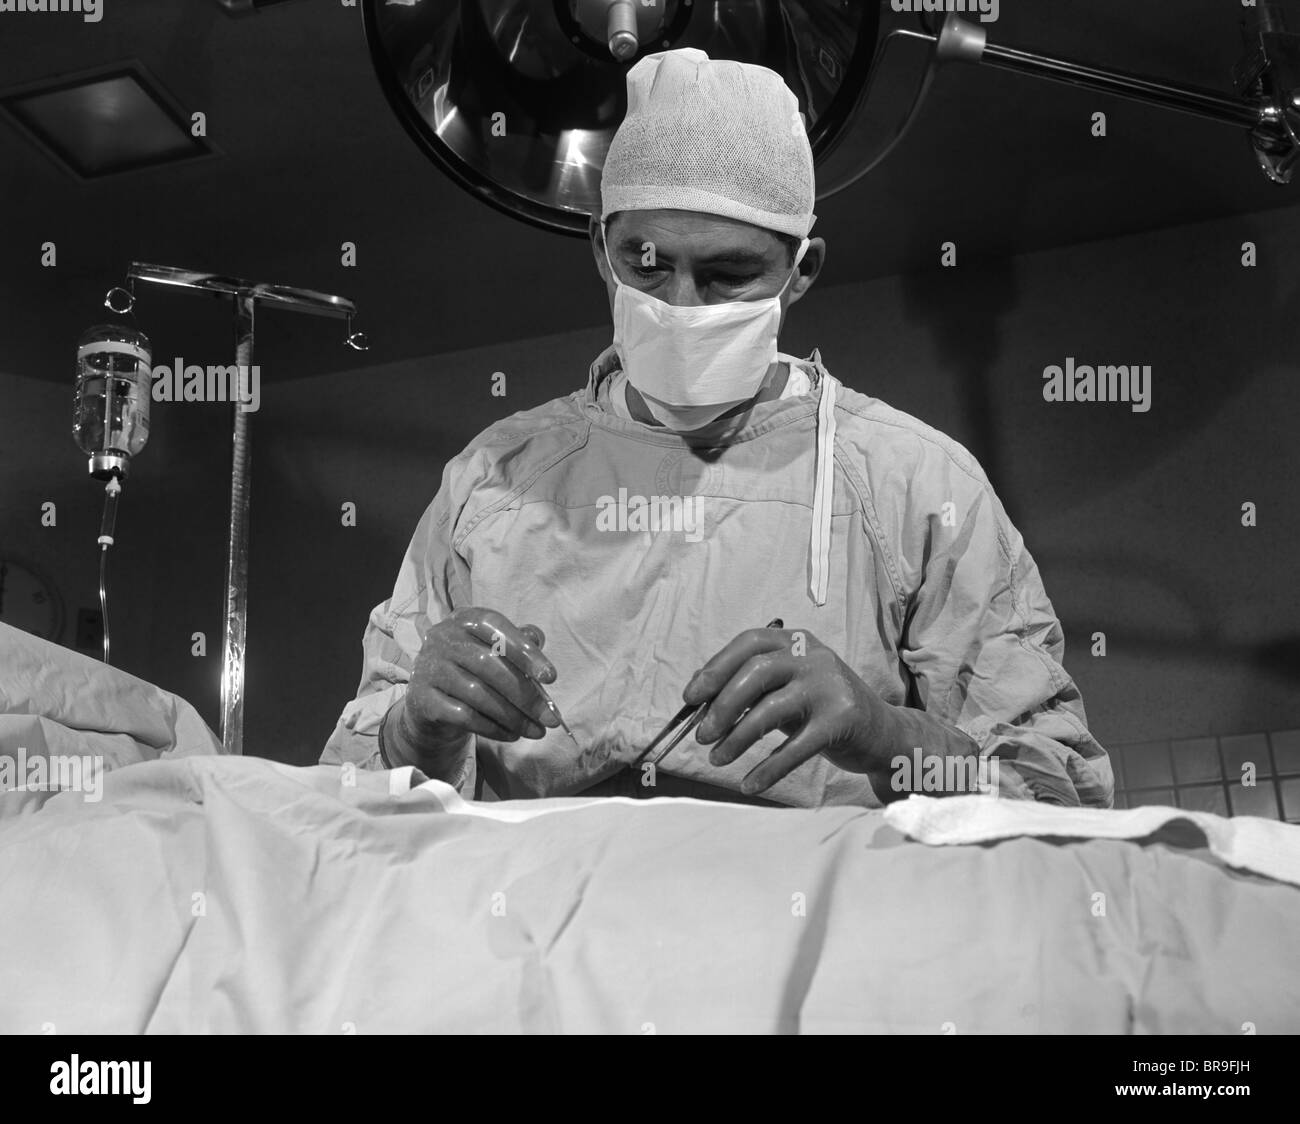 1950s SURGEON STANDING INSIDE OPERATING ROOM ABOUT TO OPERATE ON PATIENT Stock Photo